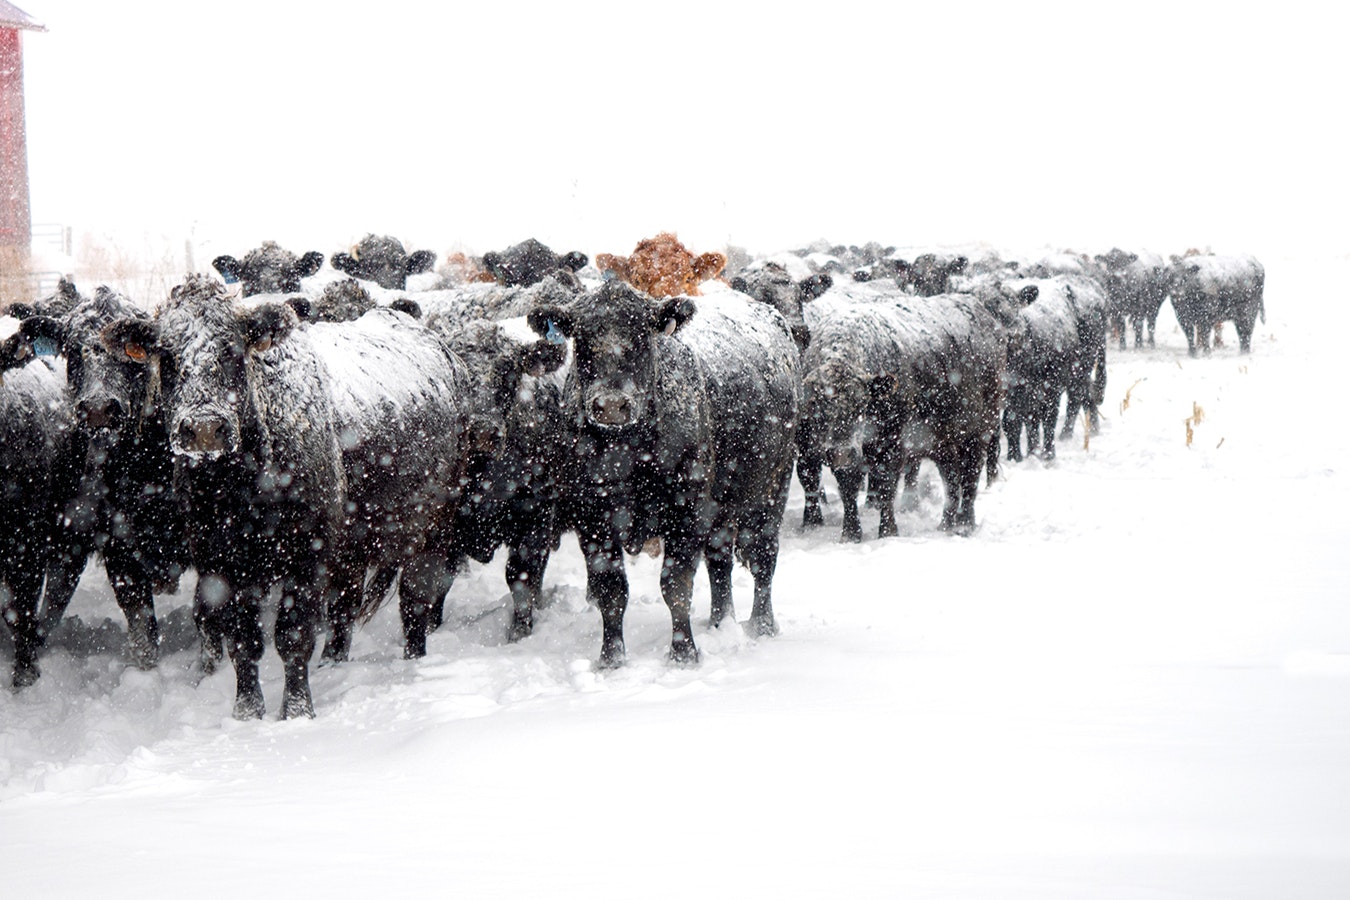 Cows in snow 3 6 23